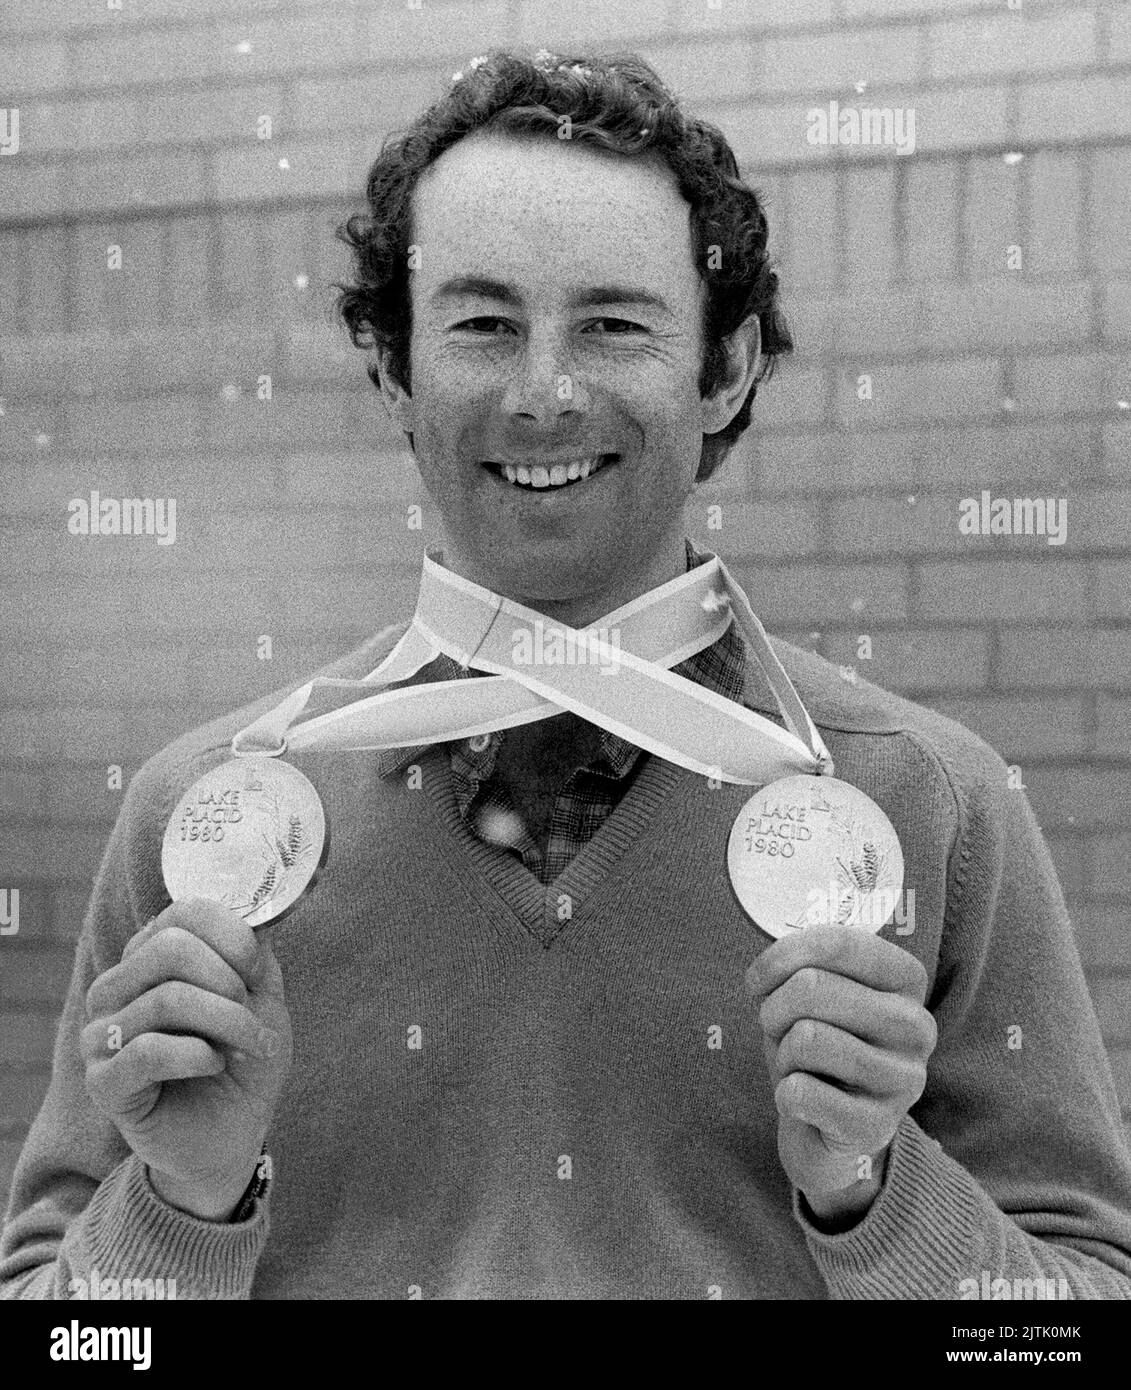 INGEMAR STENMARK Swedish alpine skier with Olympic goldmedals from Lake Placid winter games Stock Photo